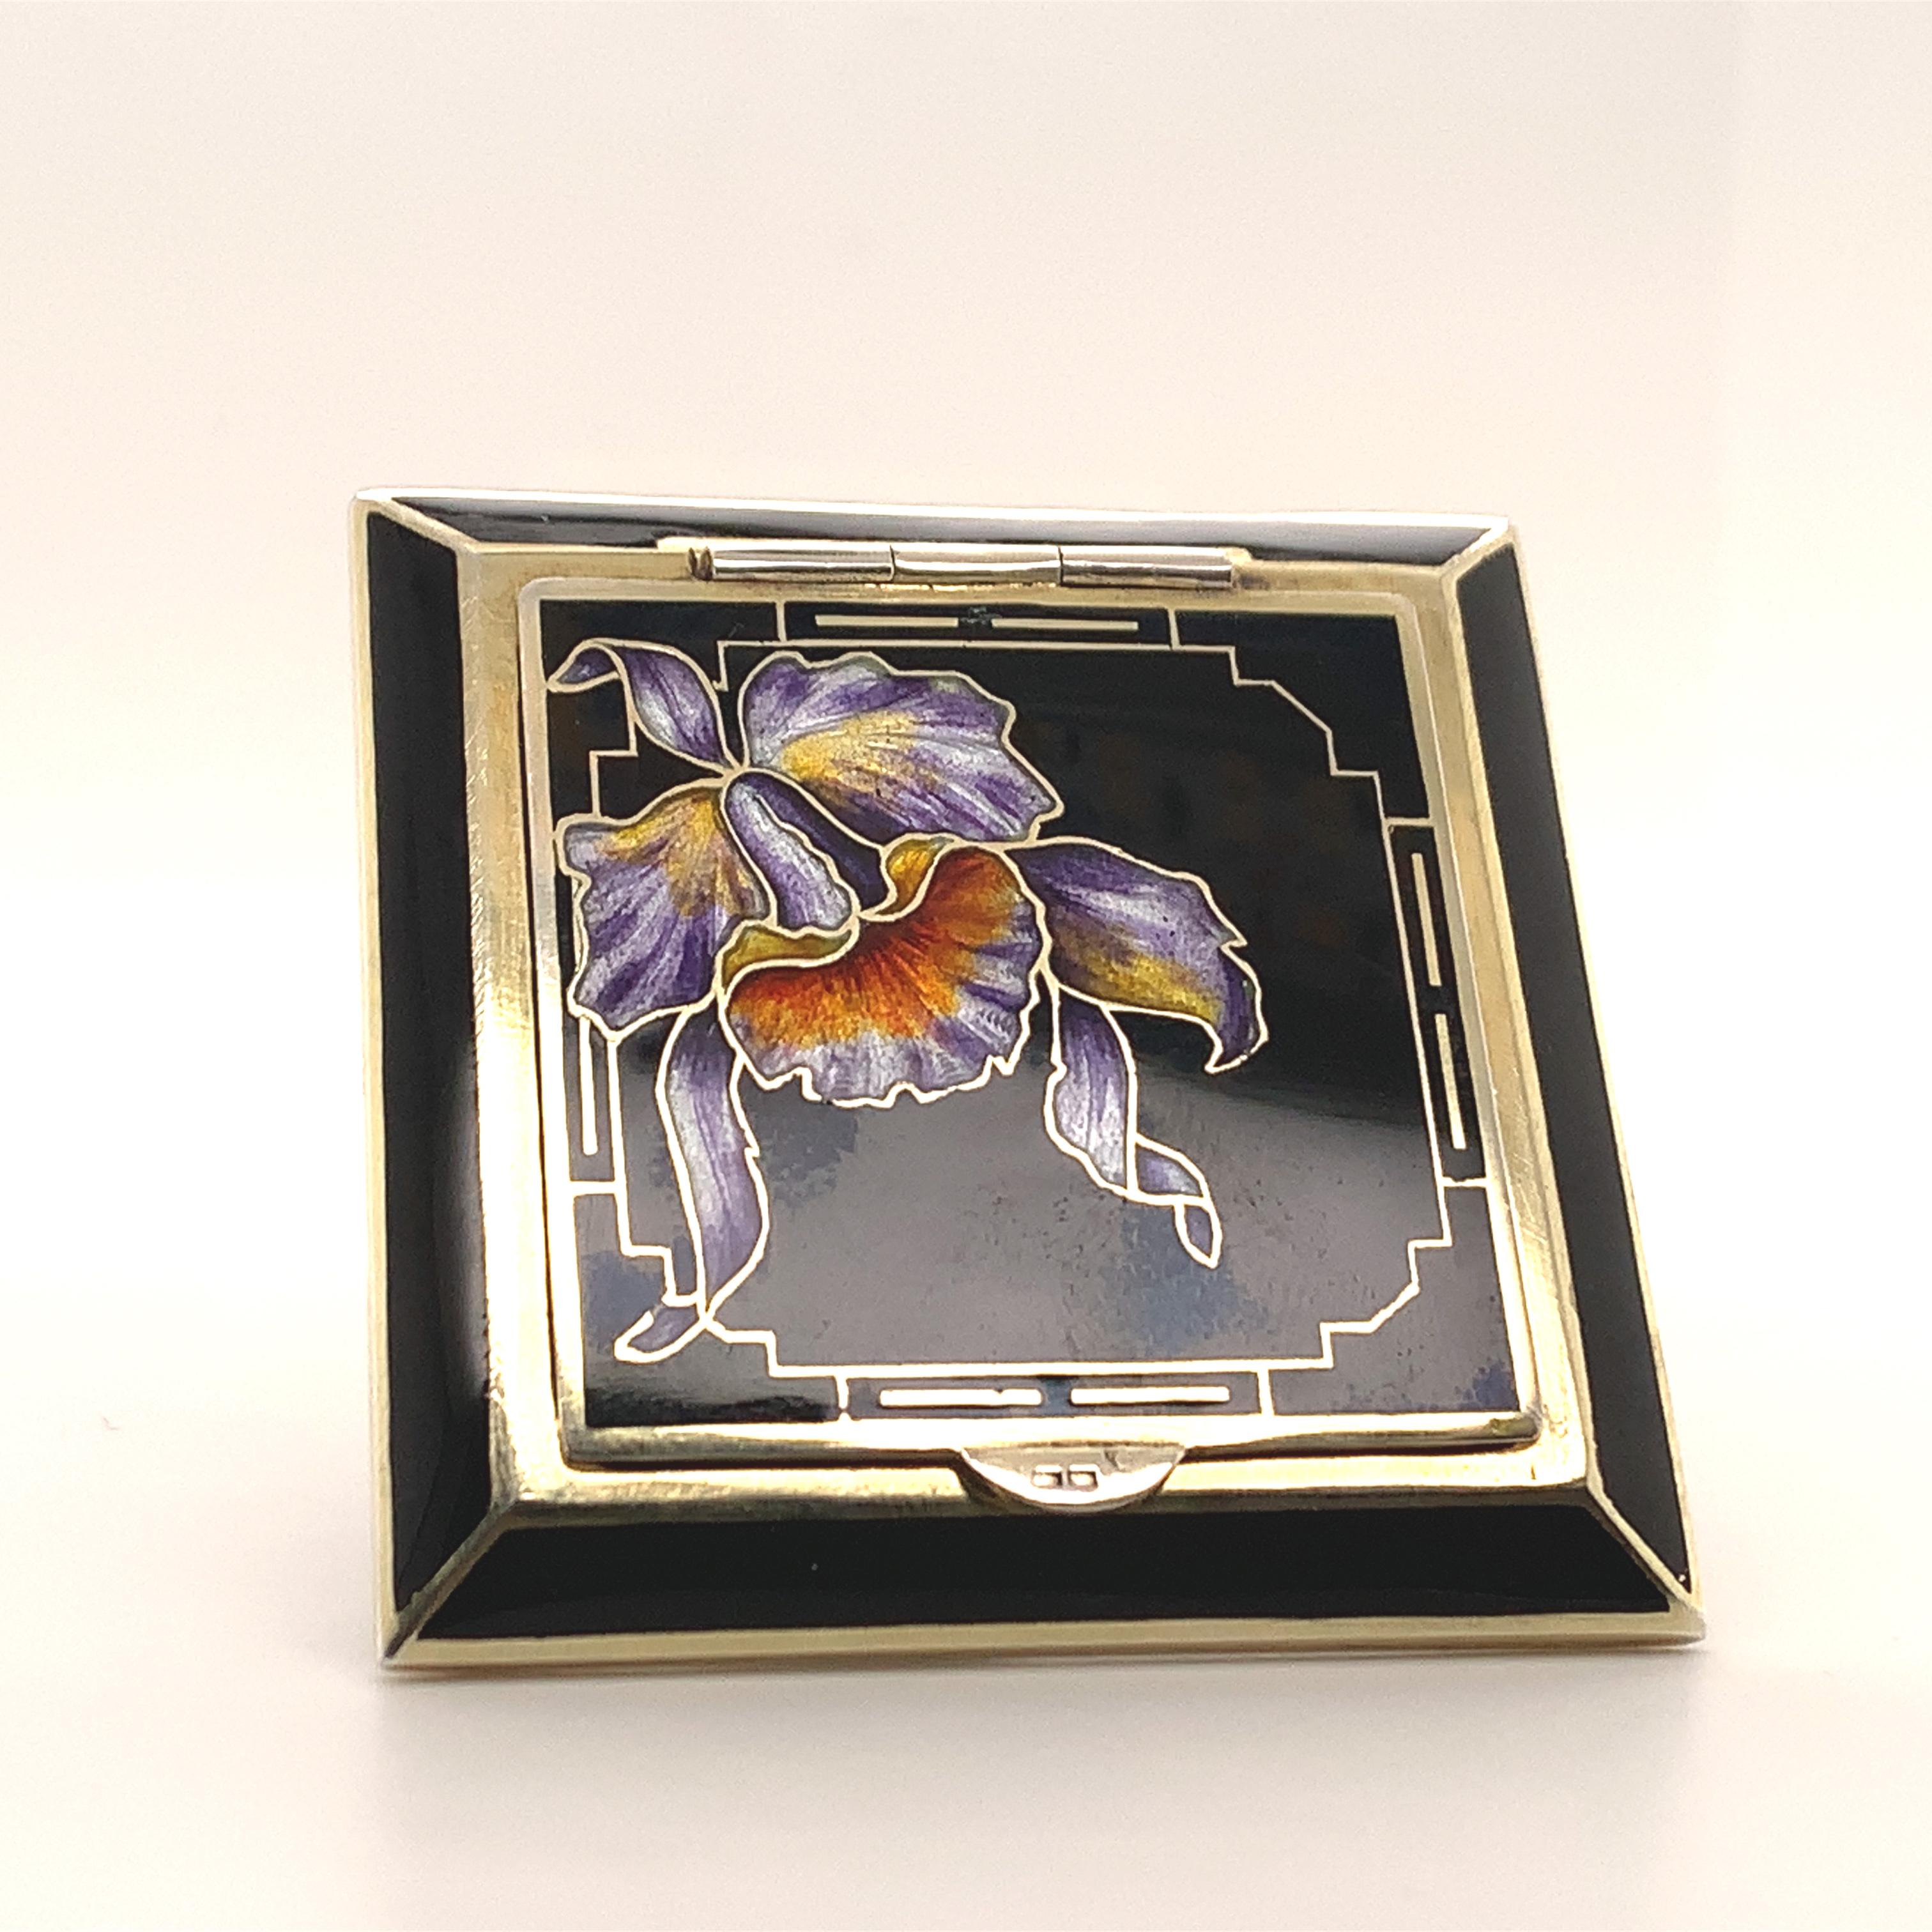 Striking and beautiful hinged compact.  Black enamel with a luminous enamel iris outlined in gold leaf.  Inside, there is a mirror and a reticulated sifter that spins to open.  Gilt metal.  Unique square shape.  2 1/8